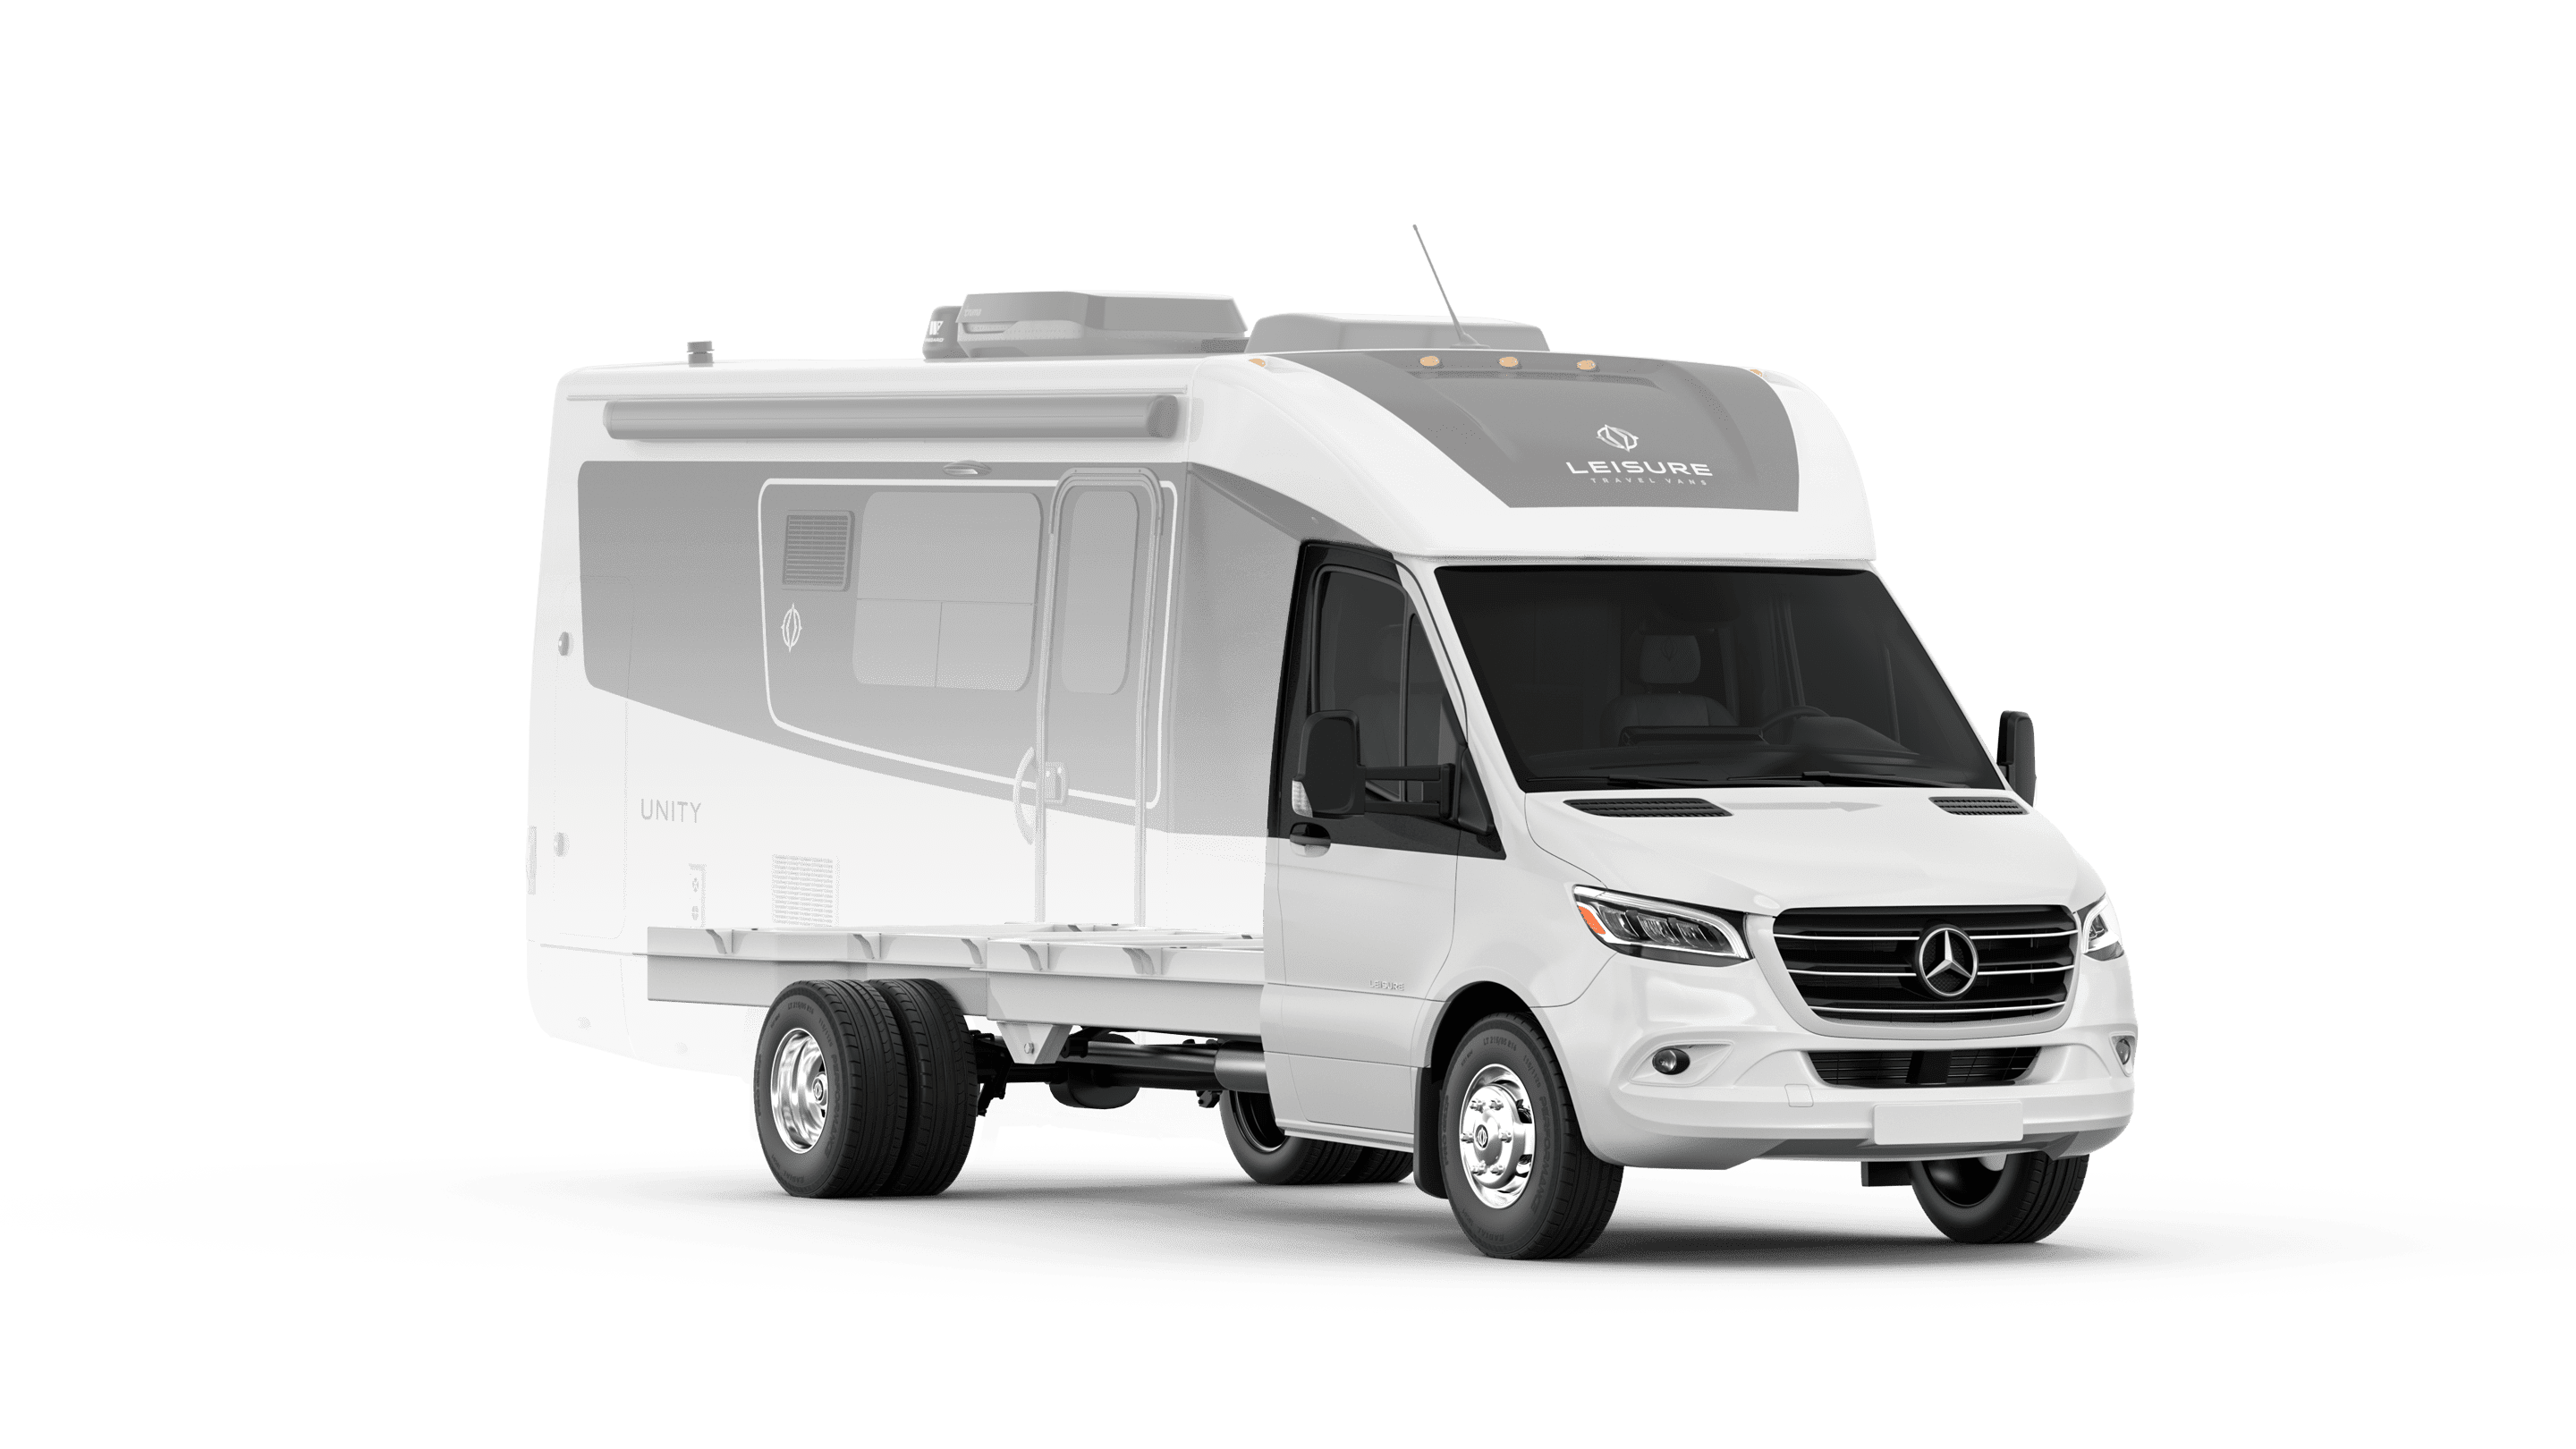 Powered by the Mercedes-Benz Sprinter